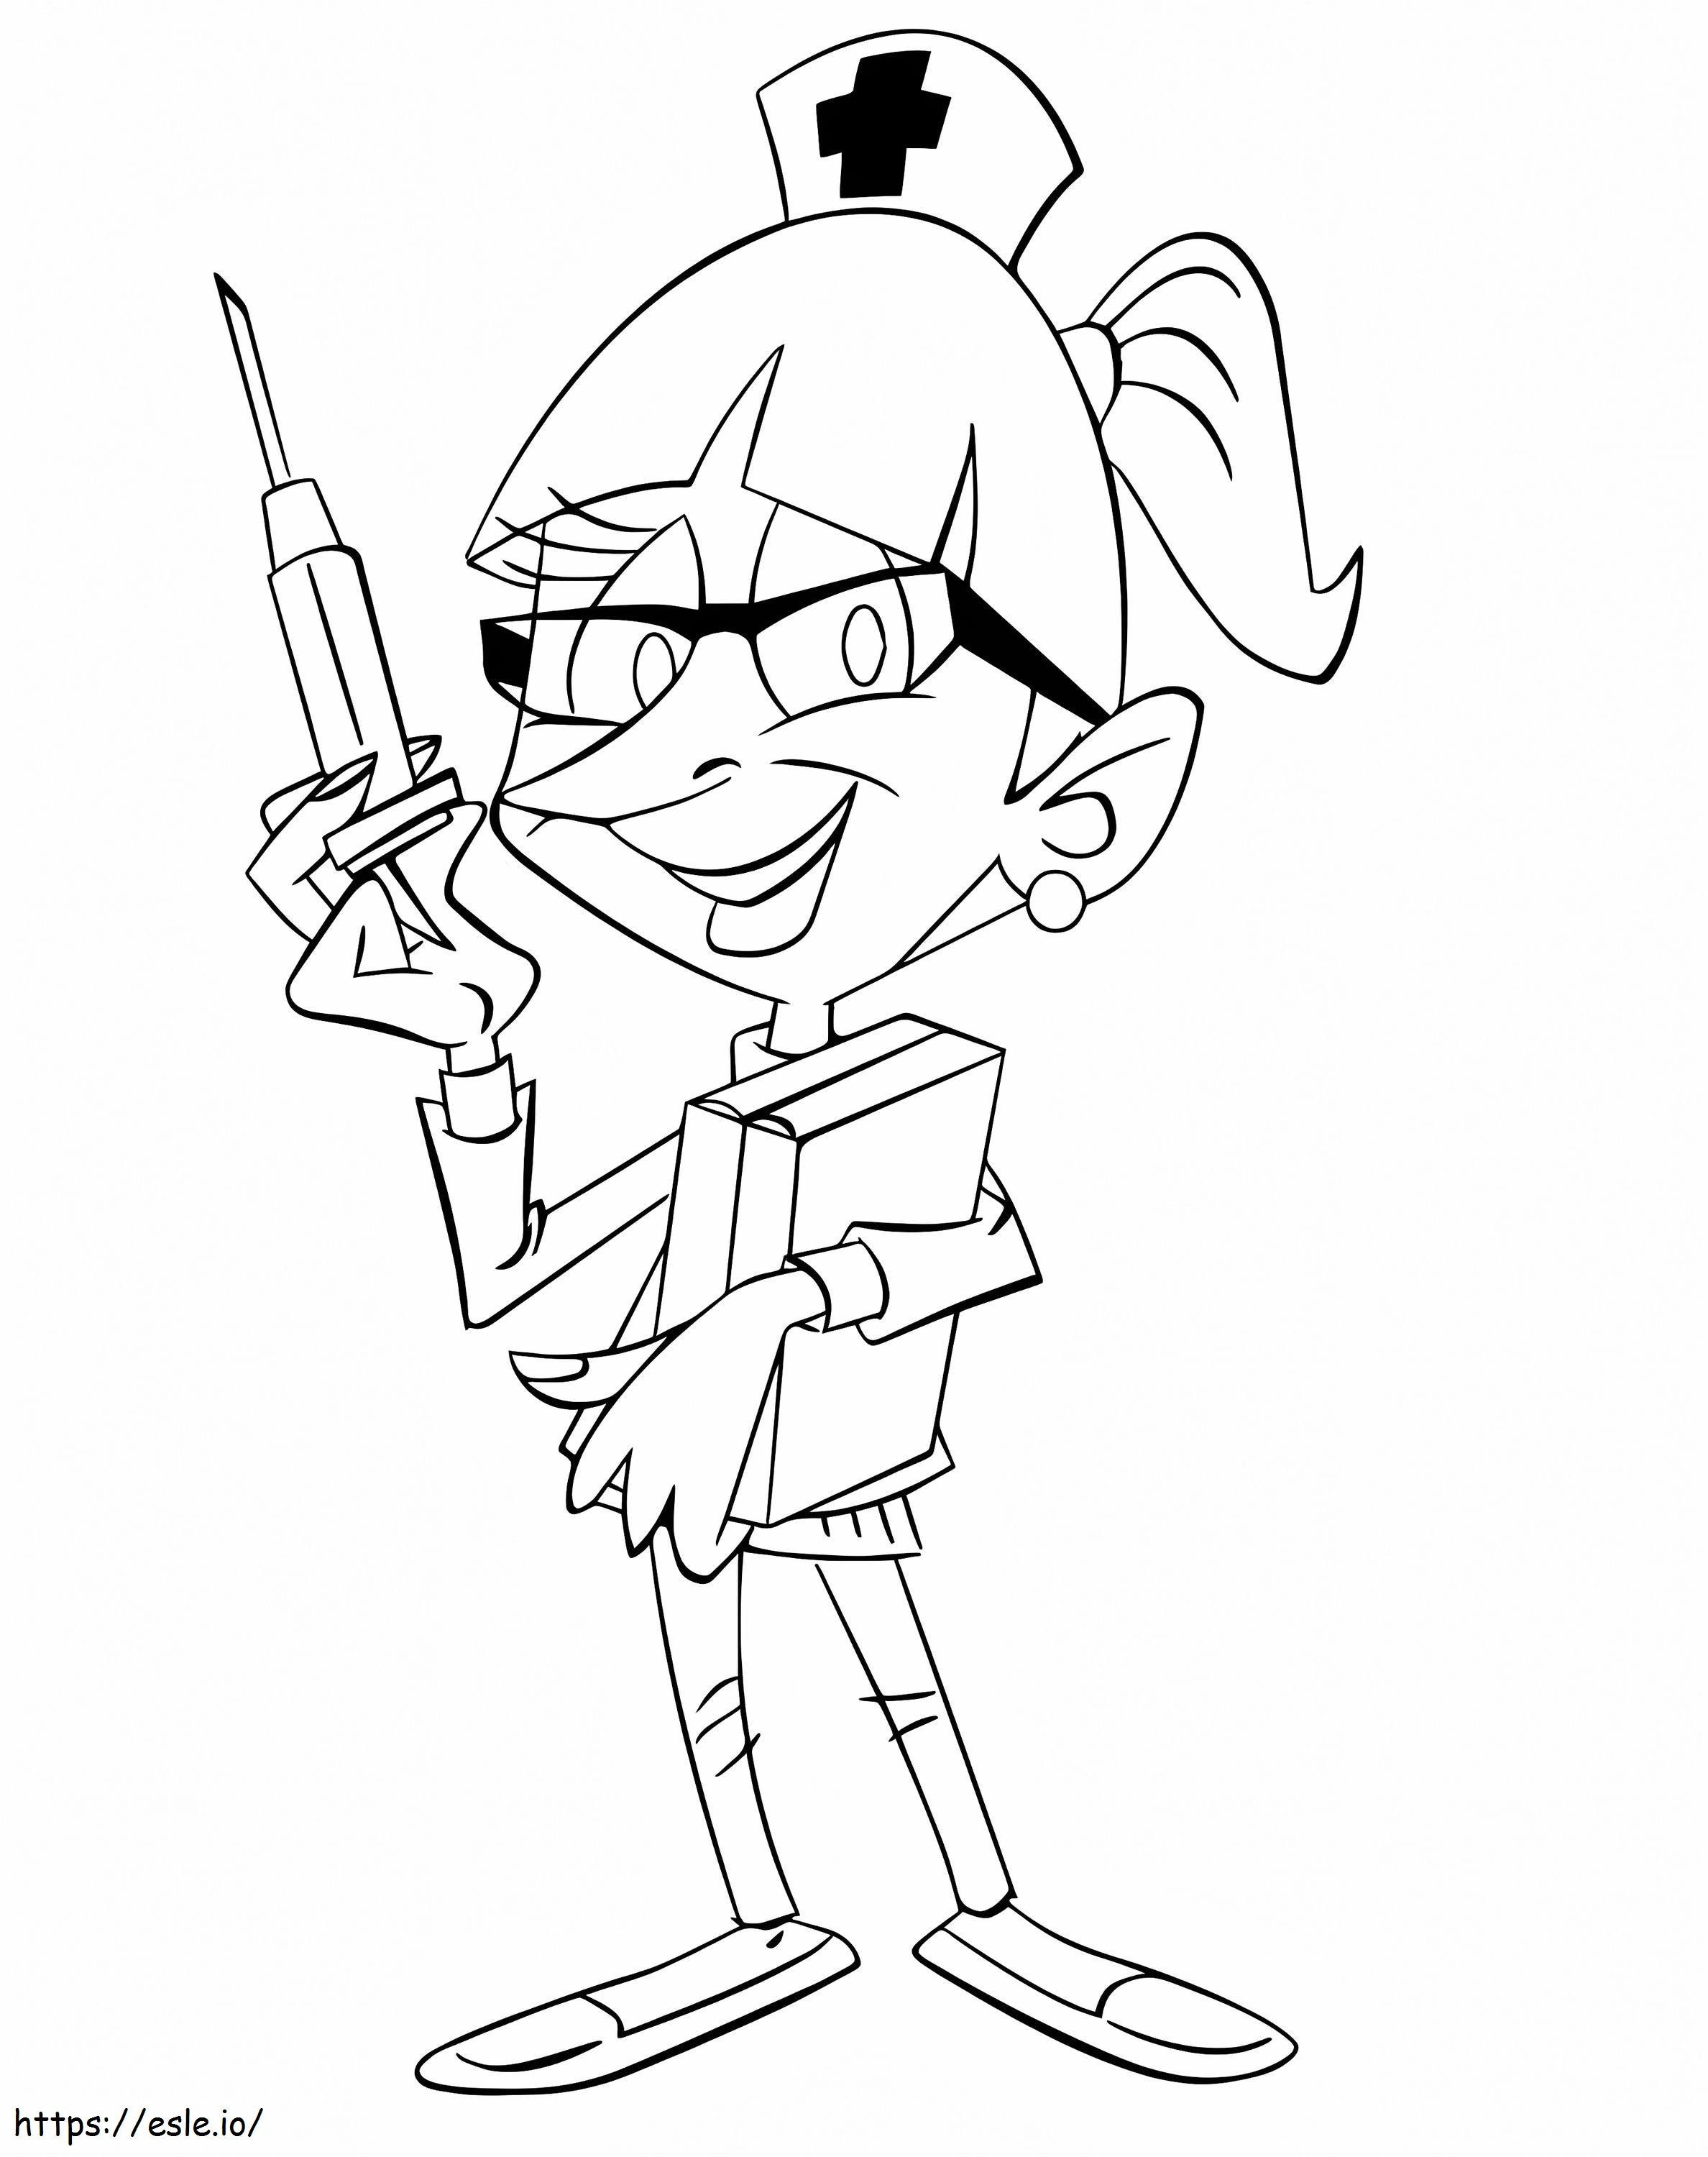 Nurse With Needle coloring page